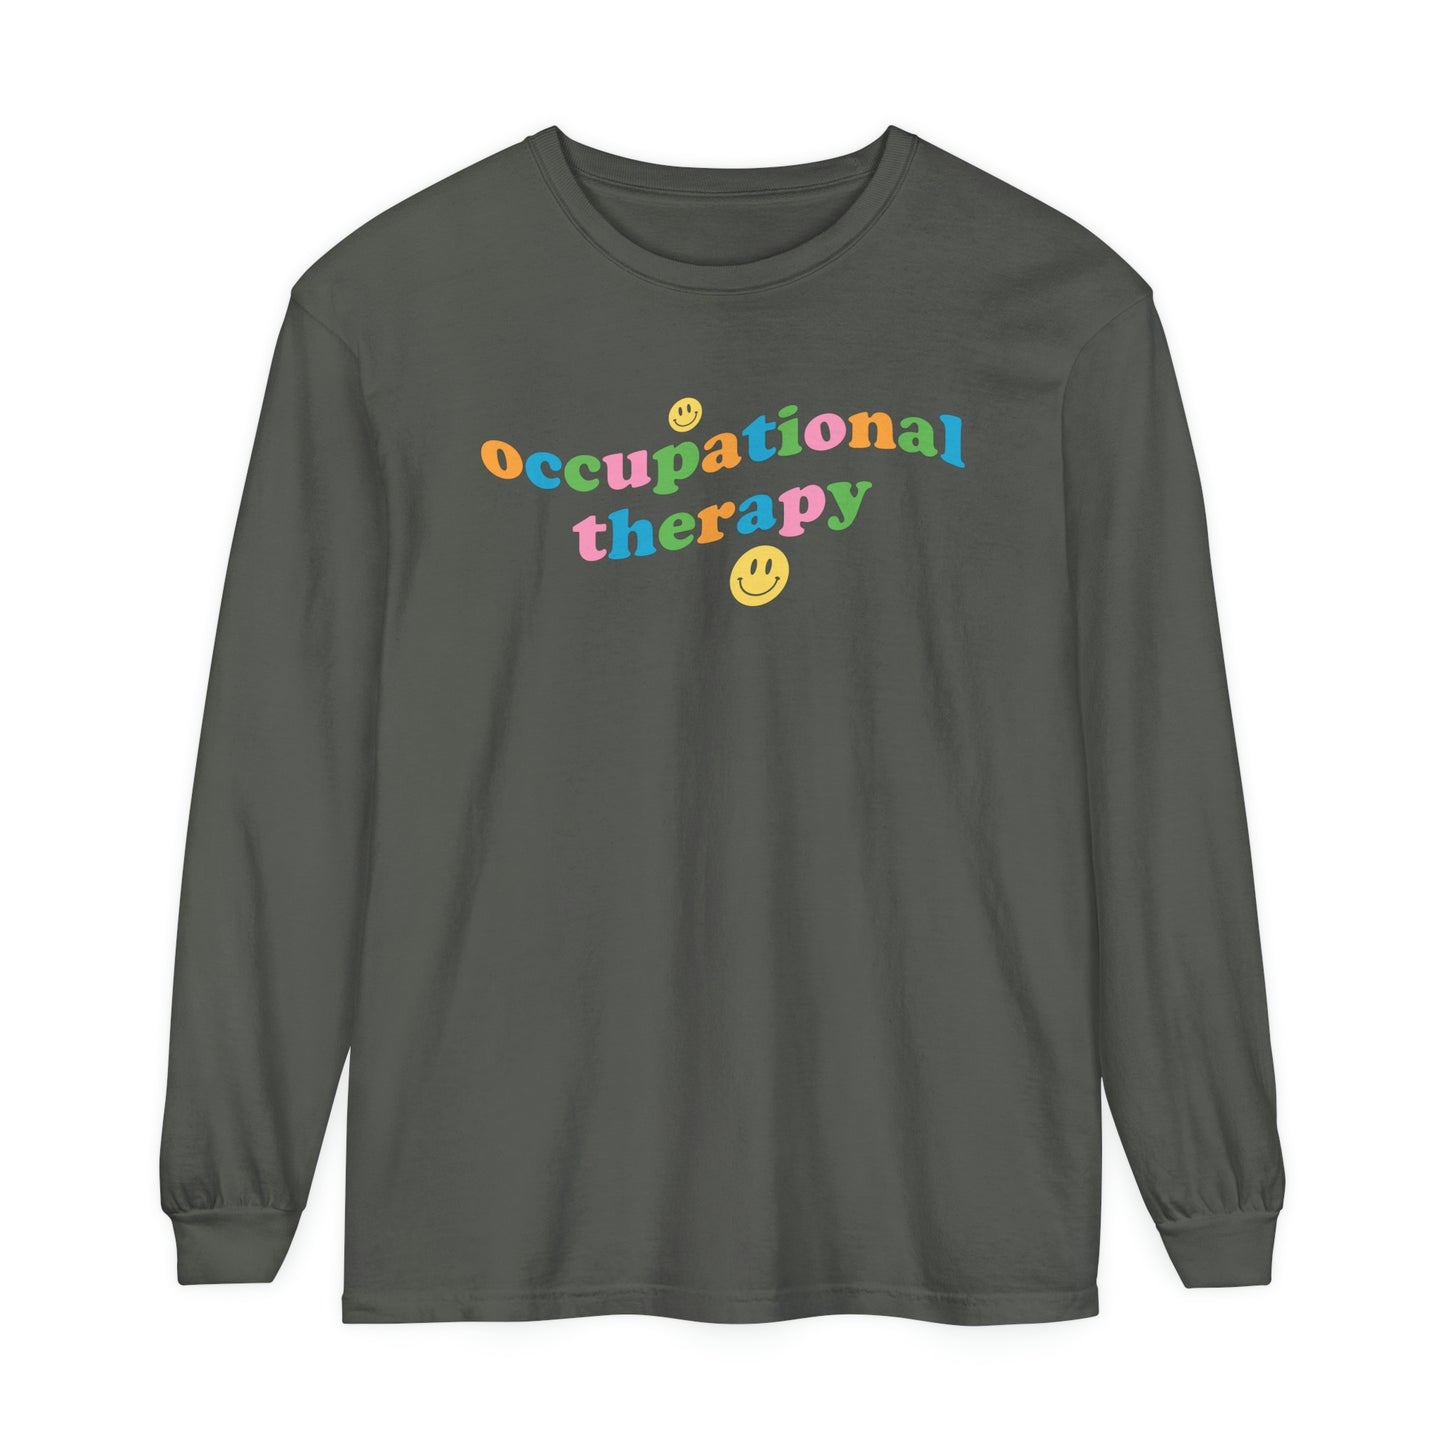 Occupational Therapy Wavy Long Sleeve Comfort Colors T-Shirt